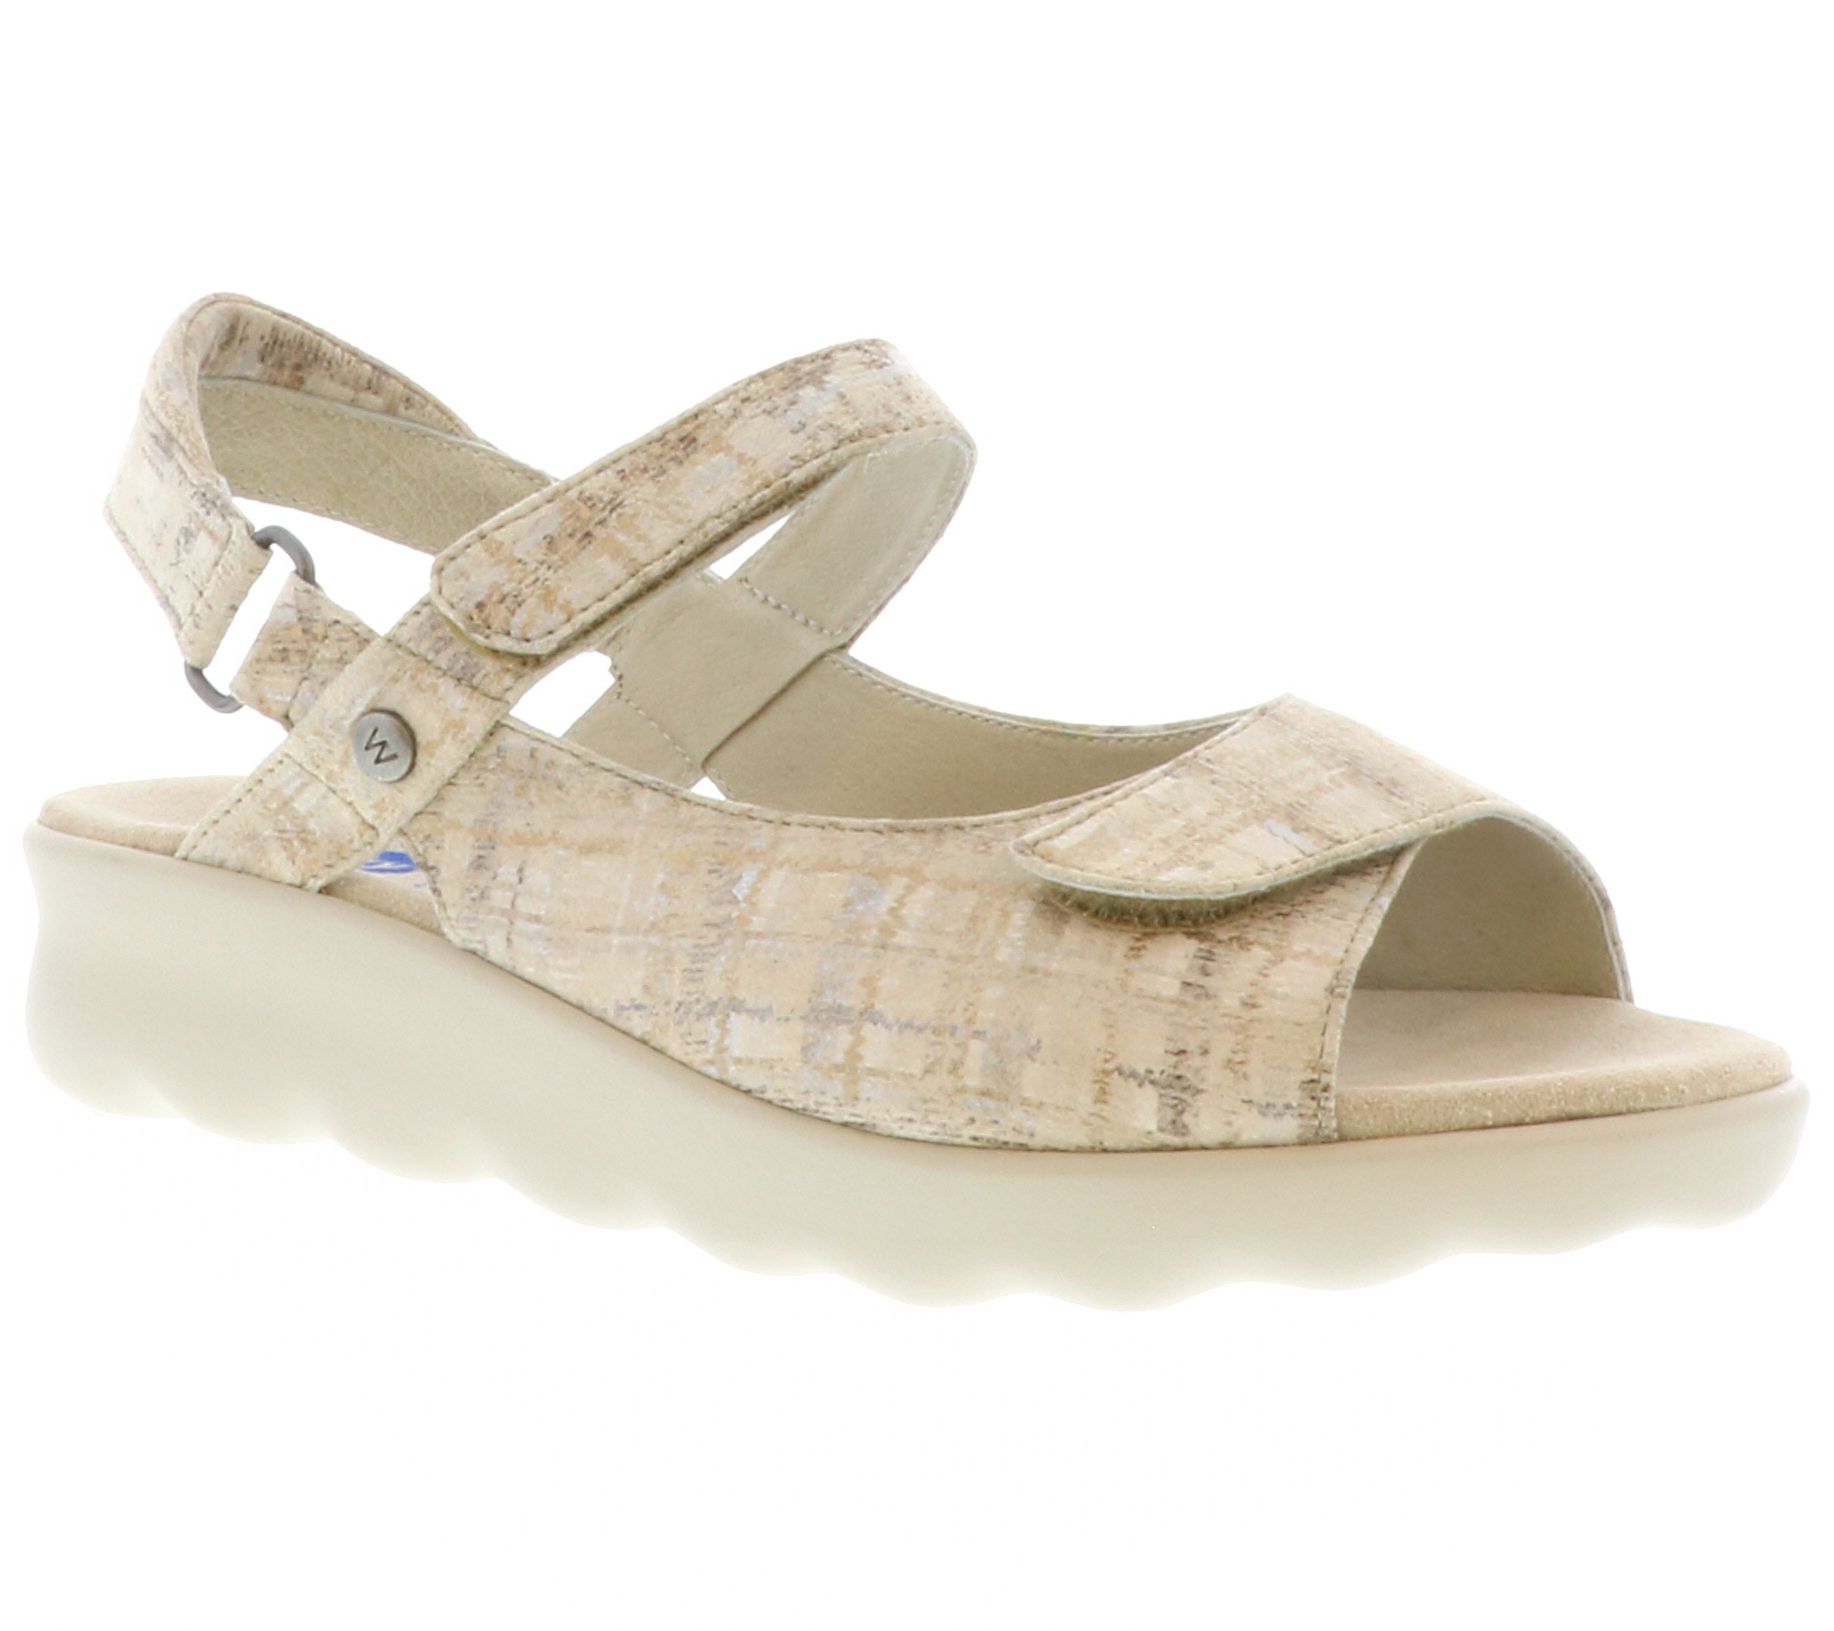 Wolky Leather Sandals - Pichu - QVC.com